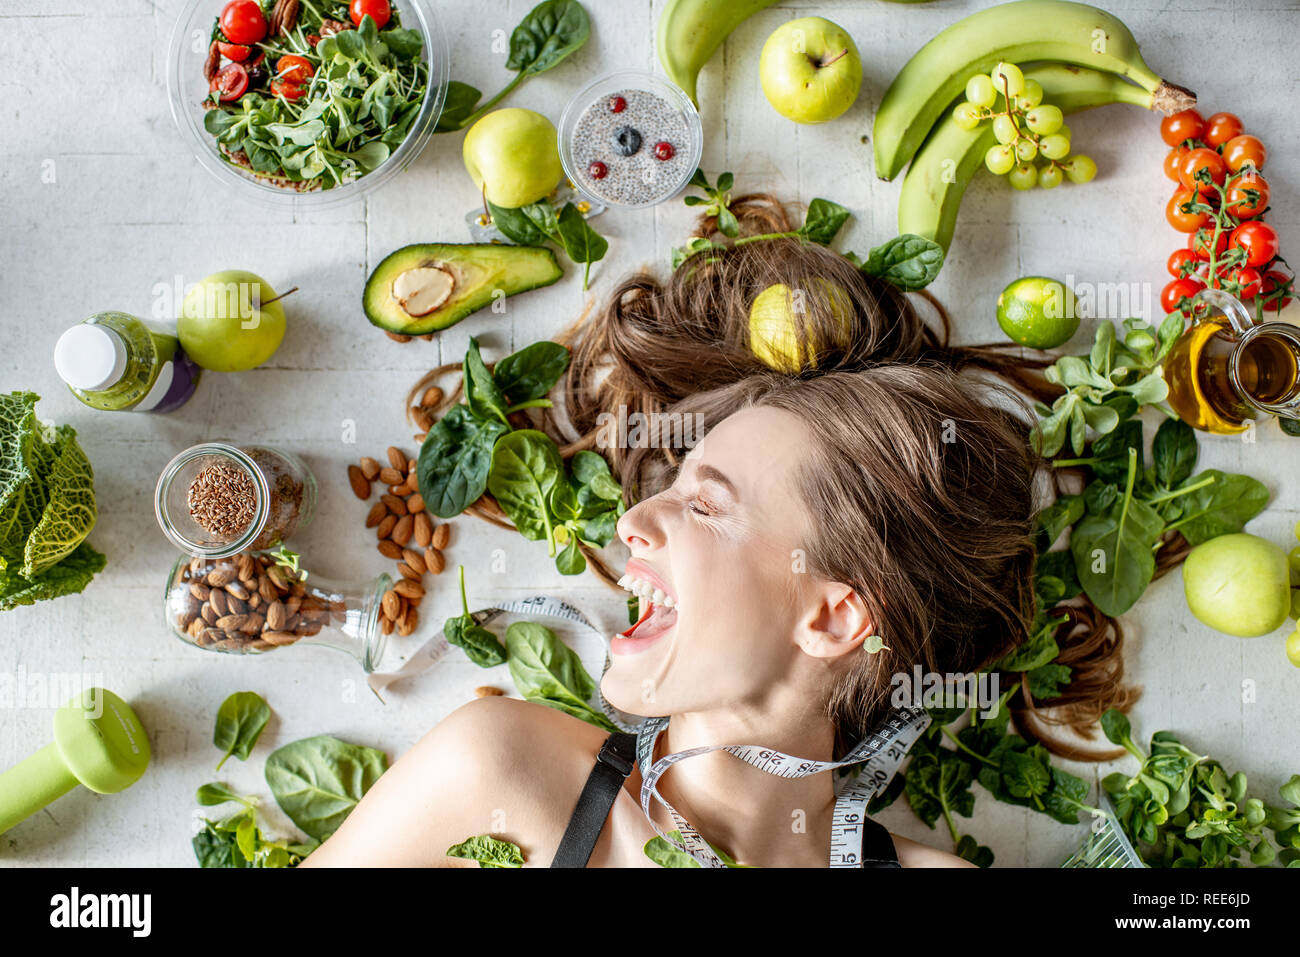 Beauty portrait of a woman surrounded by various healthy food lying on the floor. Healthy eating and sports lifestyle concept Stock Photo